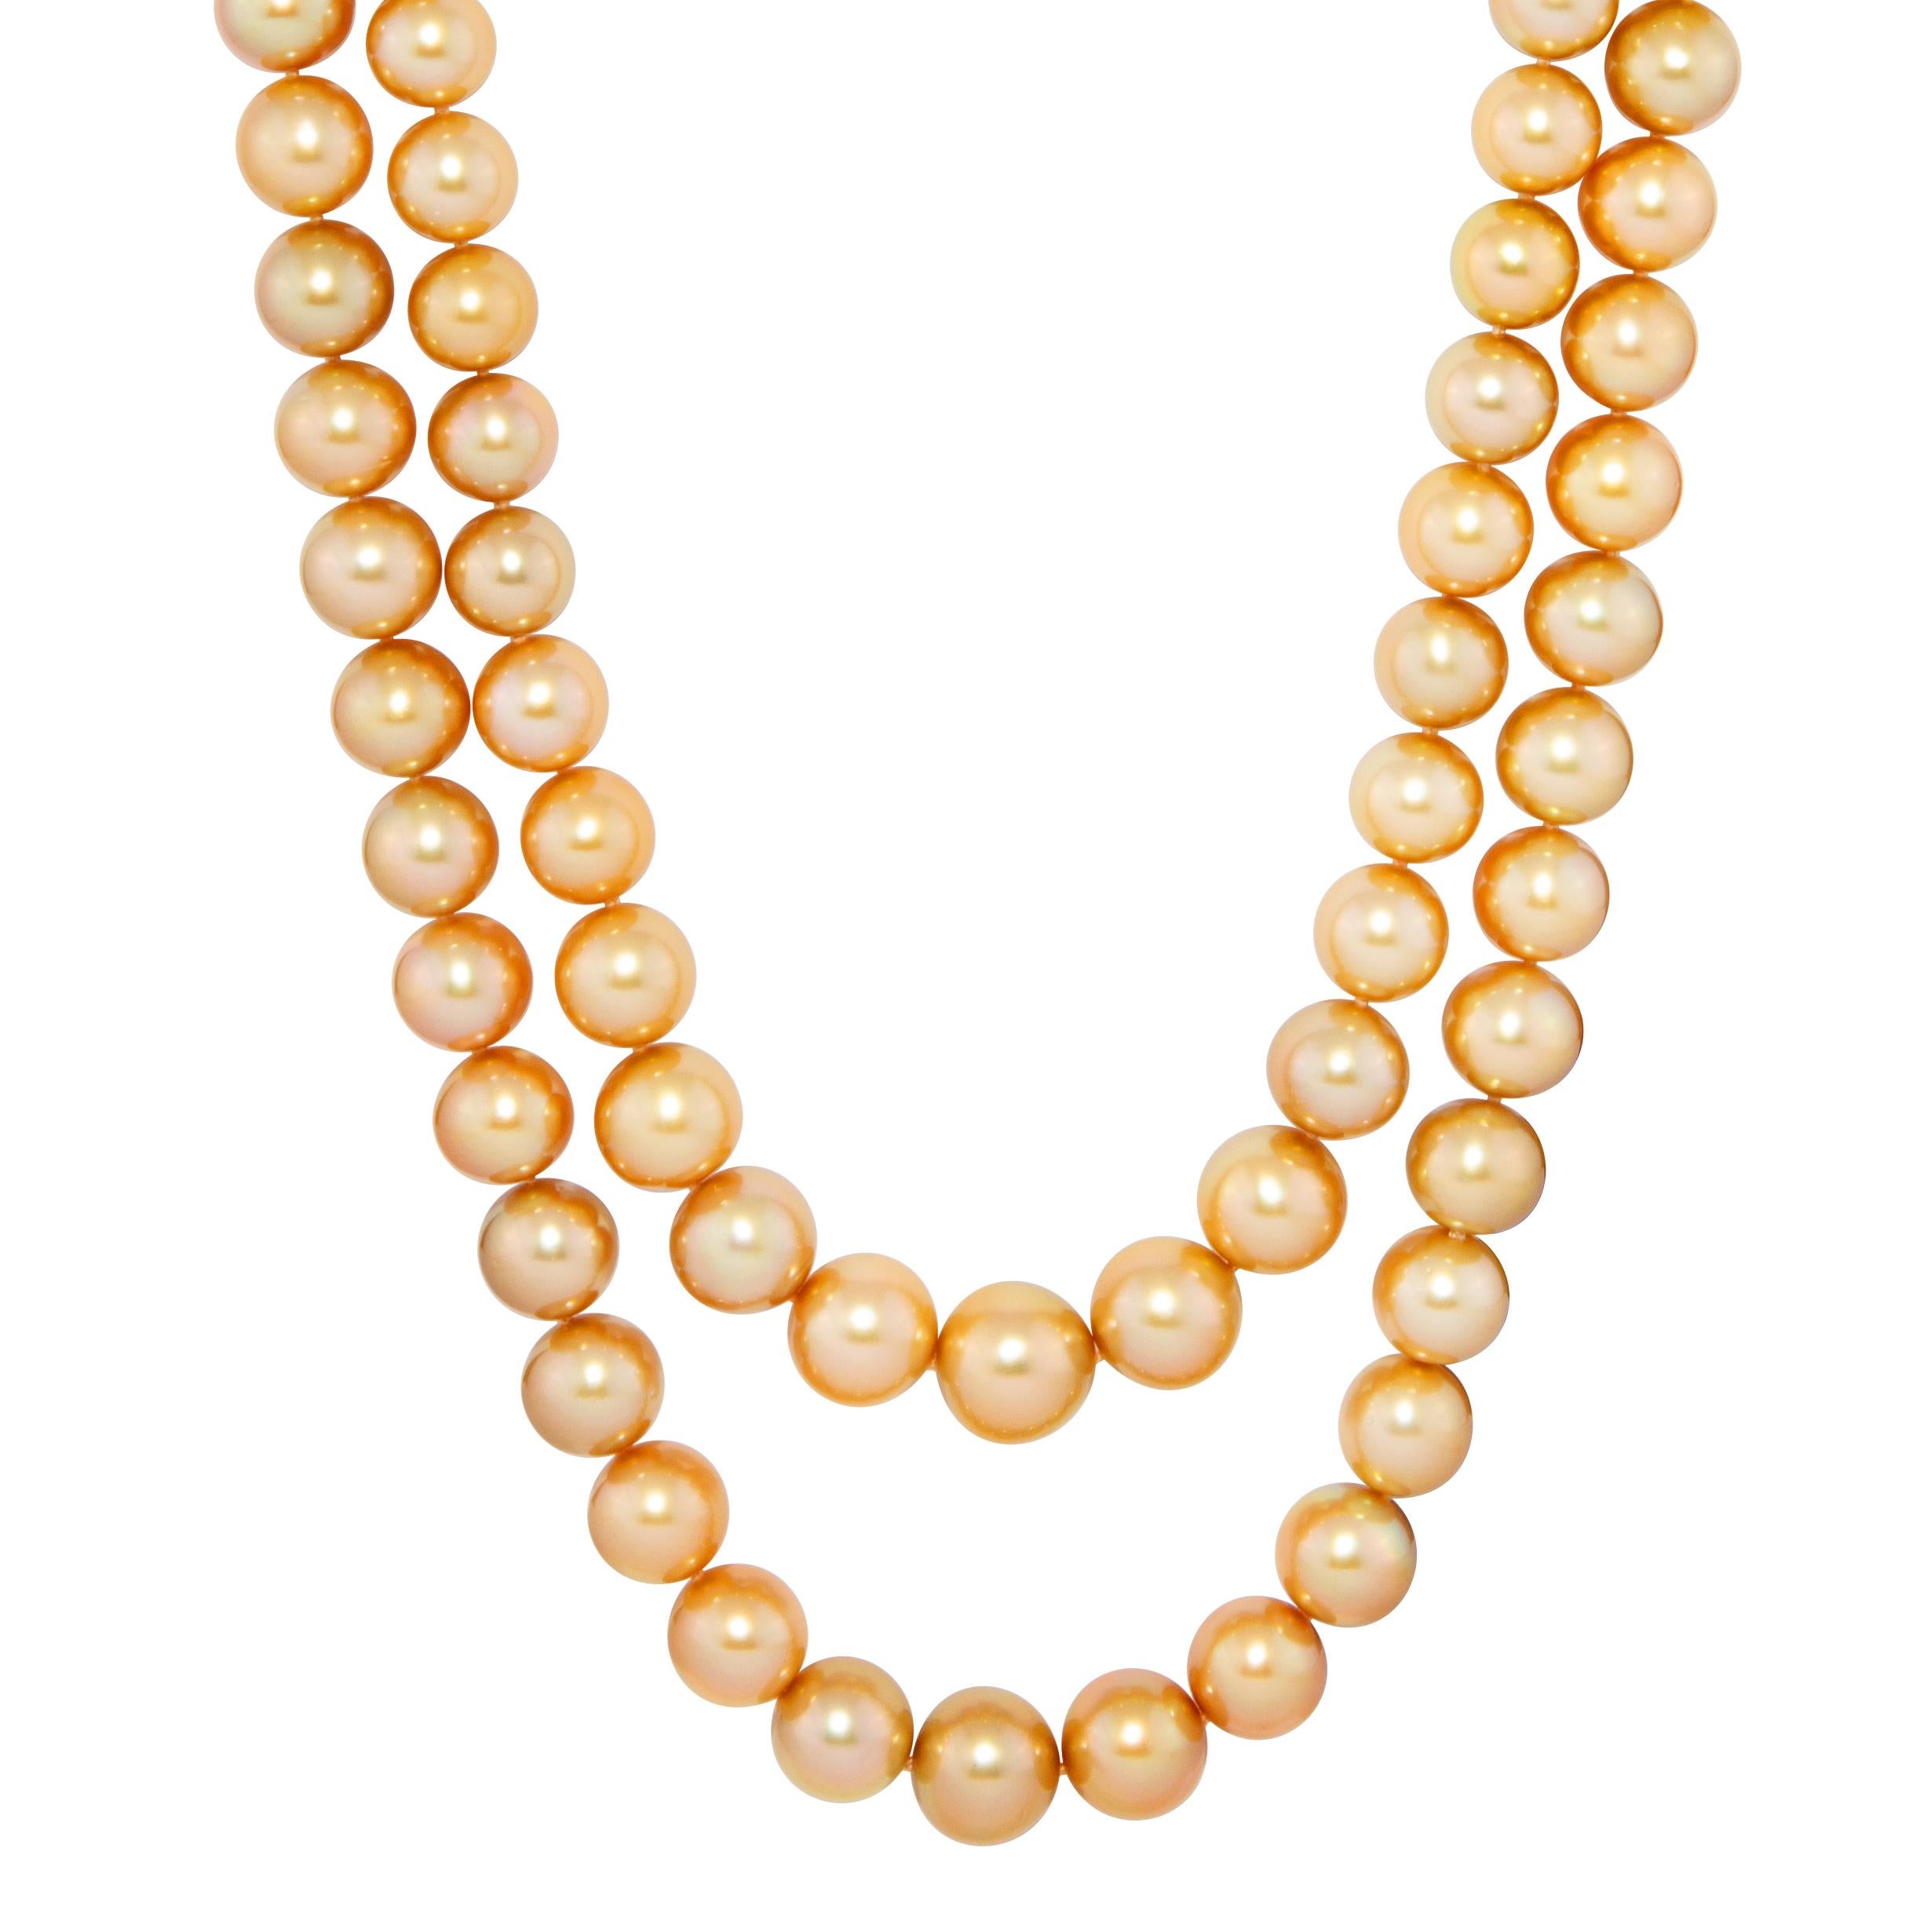 This opera length double strand South Sea golden pearl necklace is constituted by 2 individual strands.  One strand features 59 pearls measuring from 16mm to 12mm in diameter, for a length of 30”. The slightly longer strand features 63 pearls